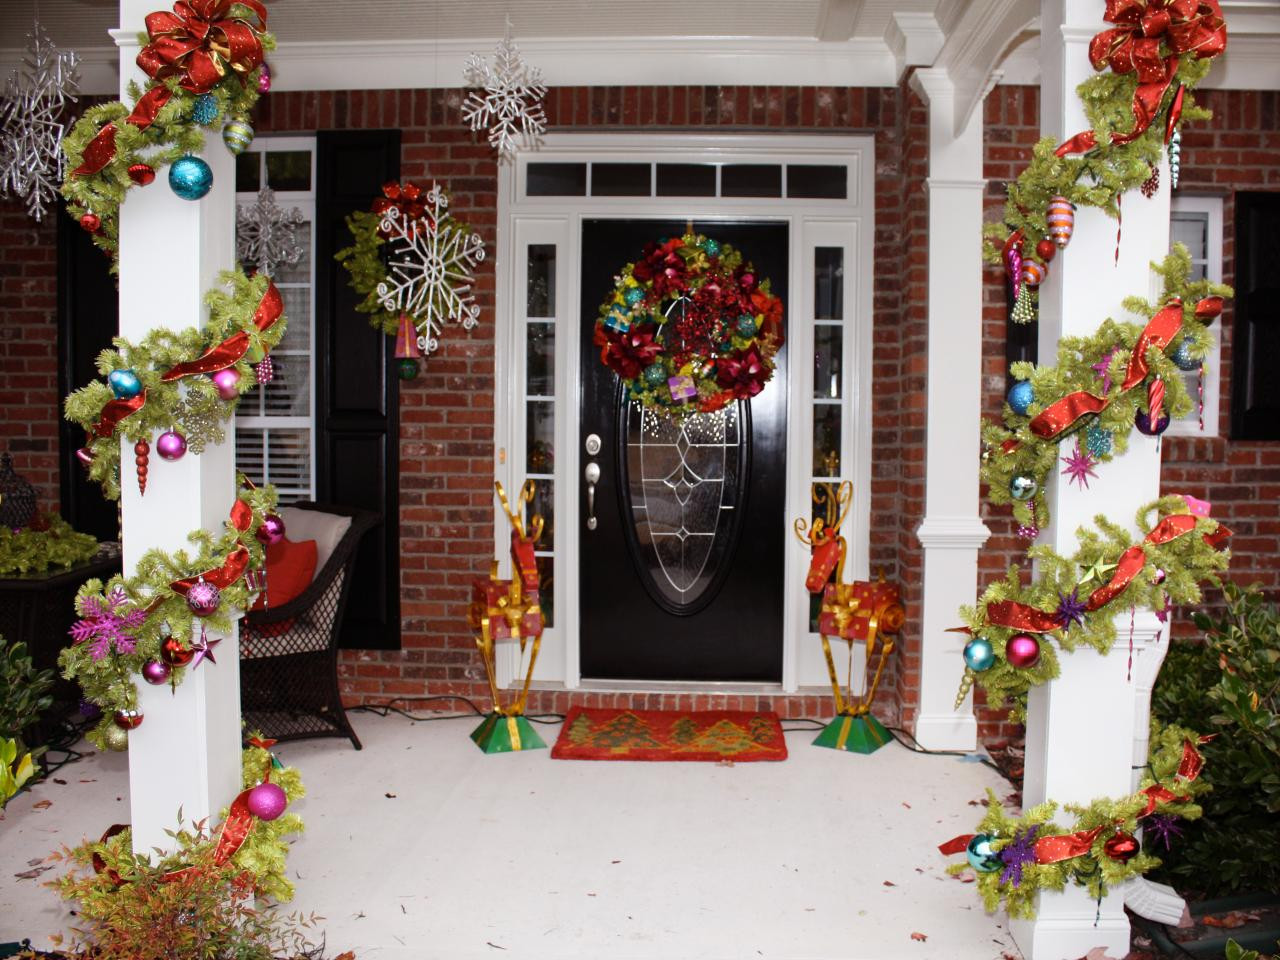 Porch Christmas Decorating
 Awesome Enrtry Way With Front Porch Christmas Decorations